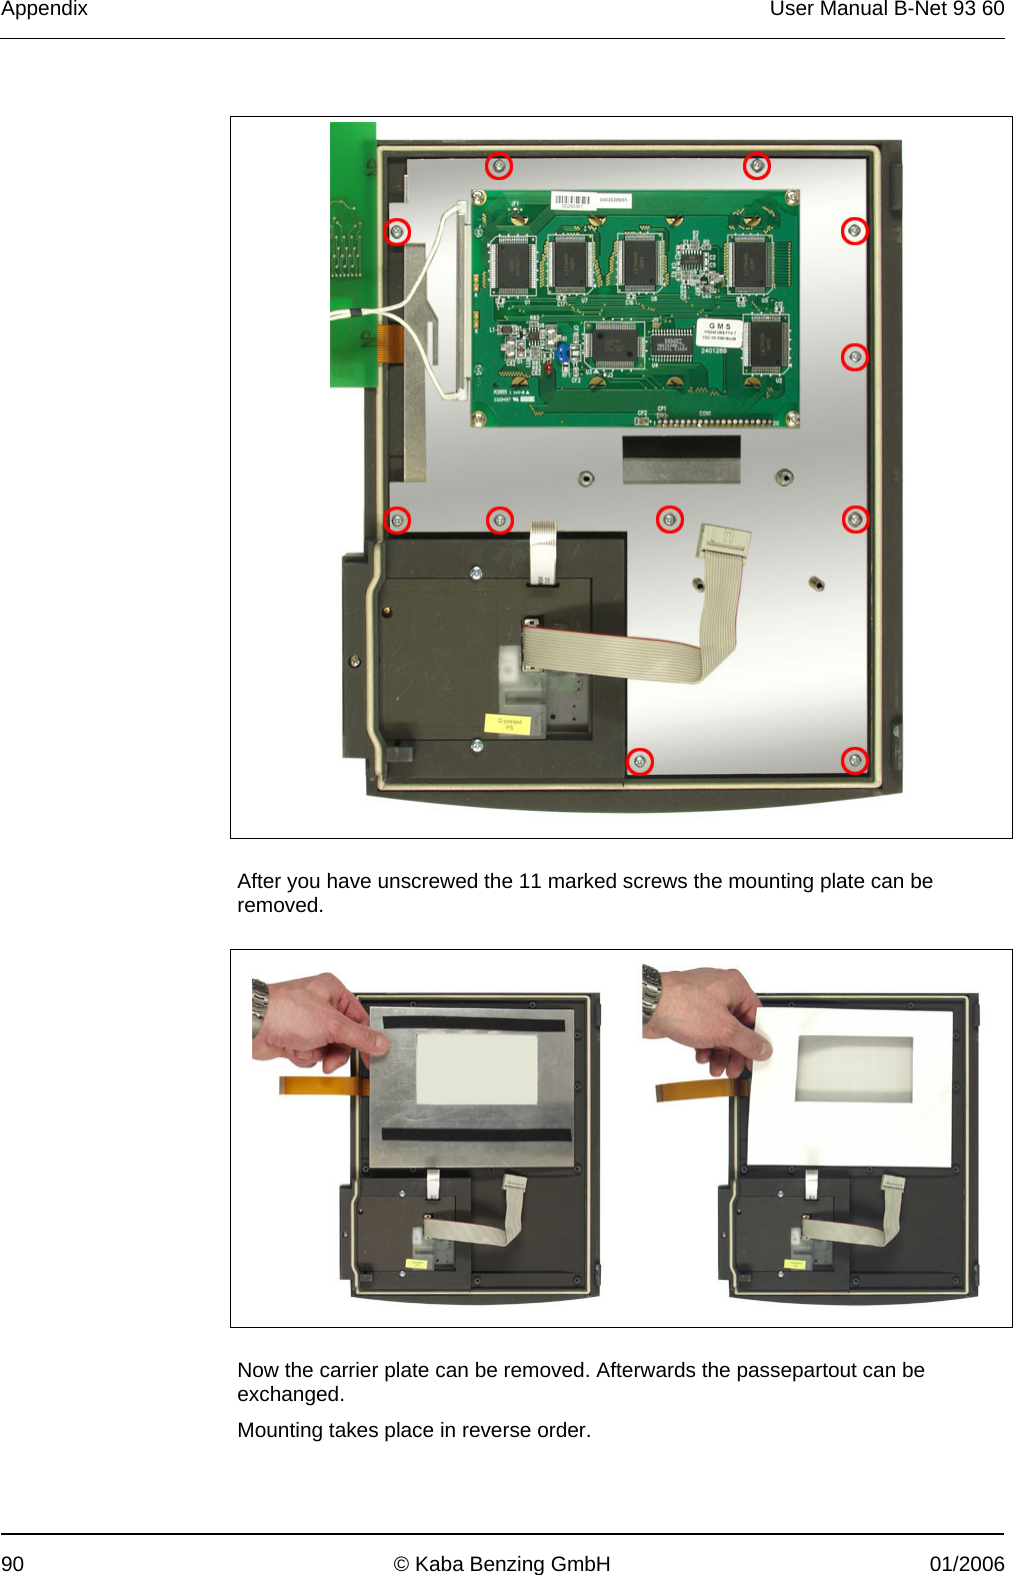 Appendix  User Manual B-Net 93 60 90  © Kaba Benzing GmbH  01/2006     After you have unscrewed the 11 marked screws the mounting plate can be removed.     Now the carrier plate can be removed. Afterwards the passepartout can be exchanged. Mounting takes place in reverse order. 